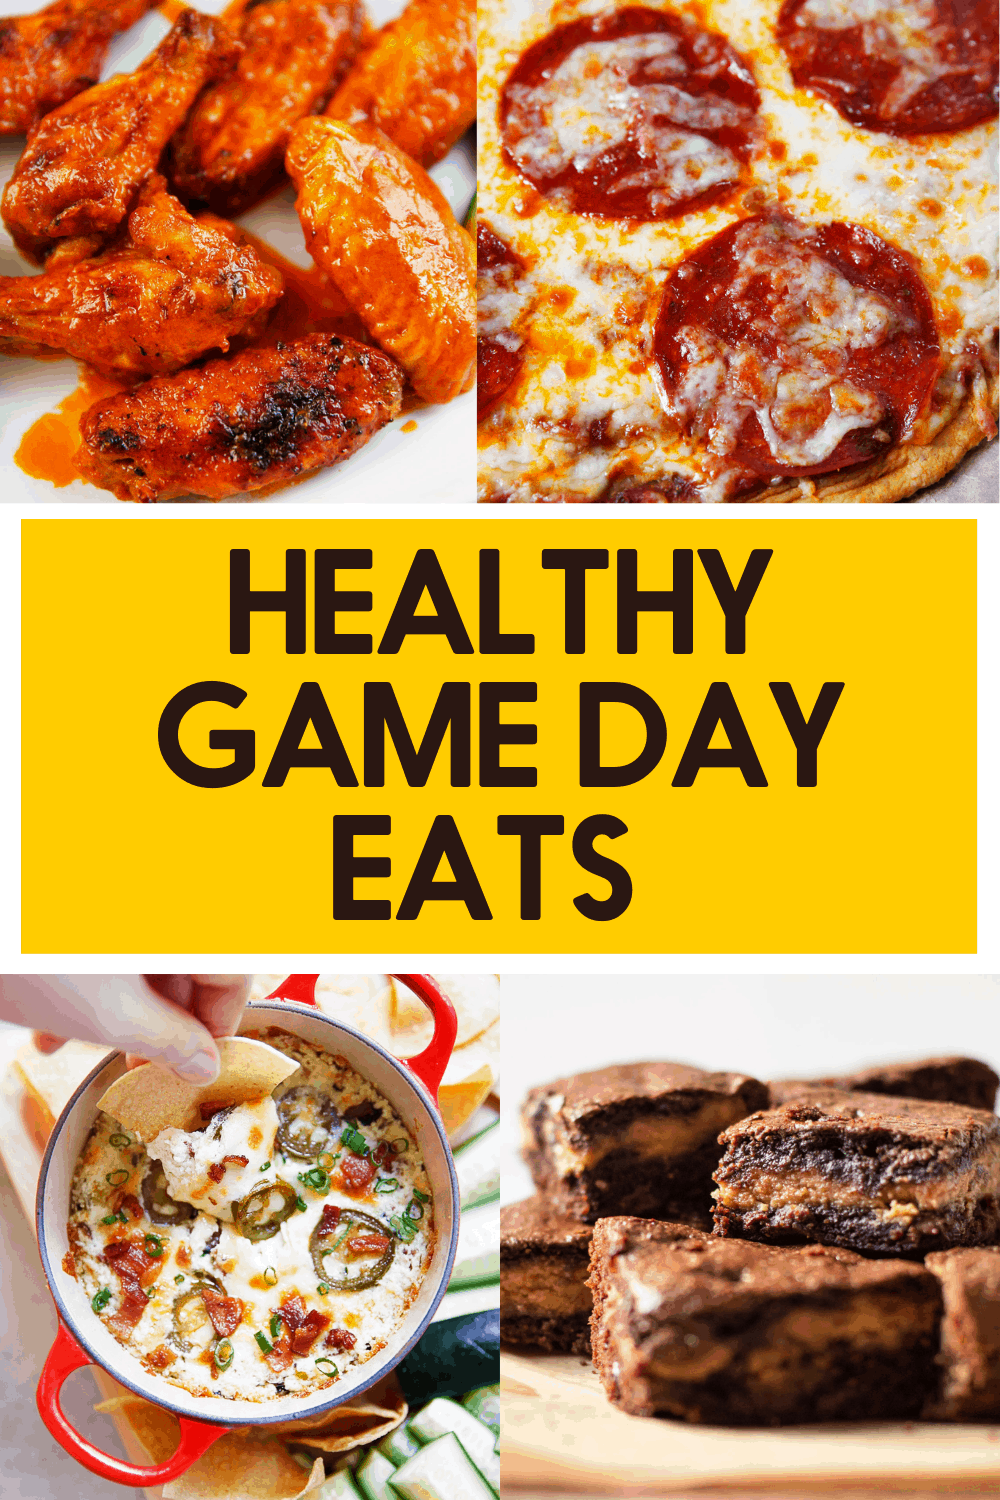 Healthy Game Day Recipes